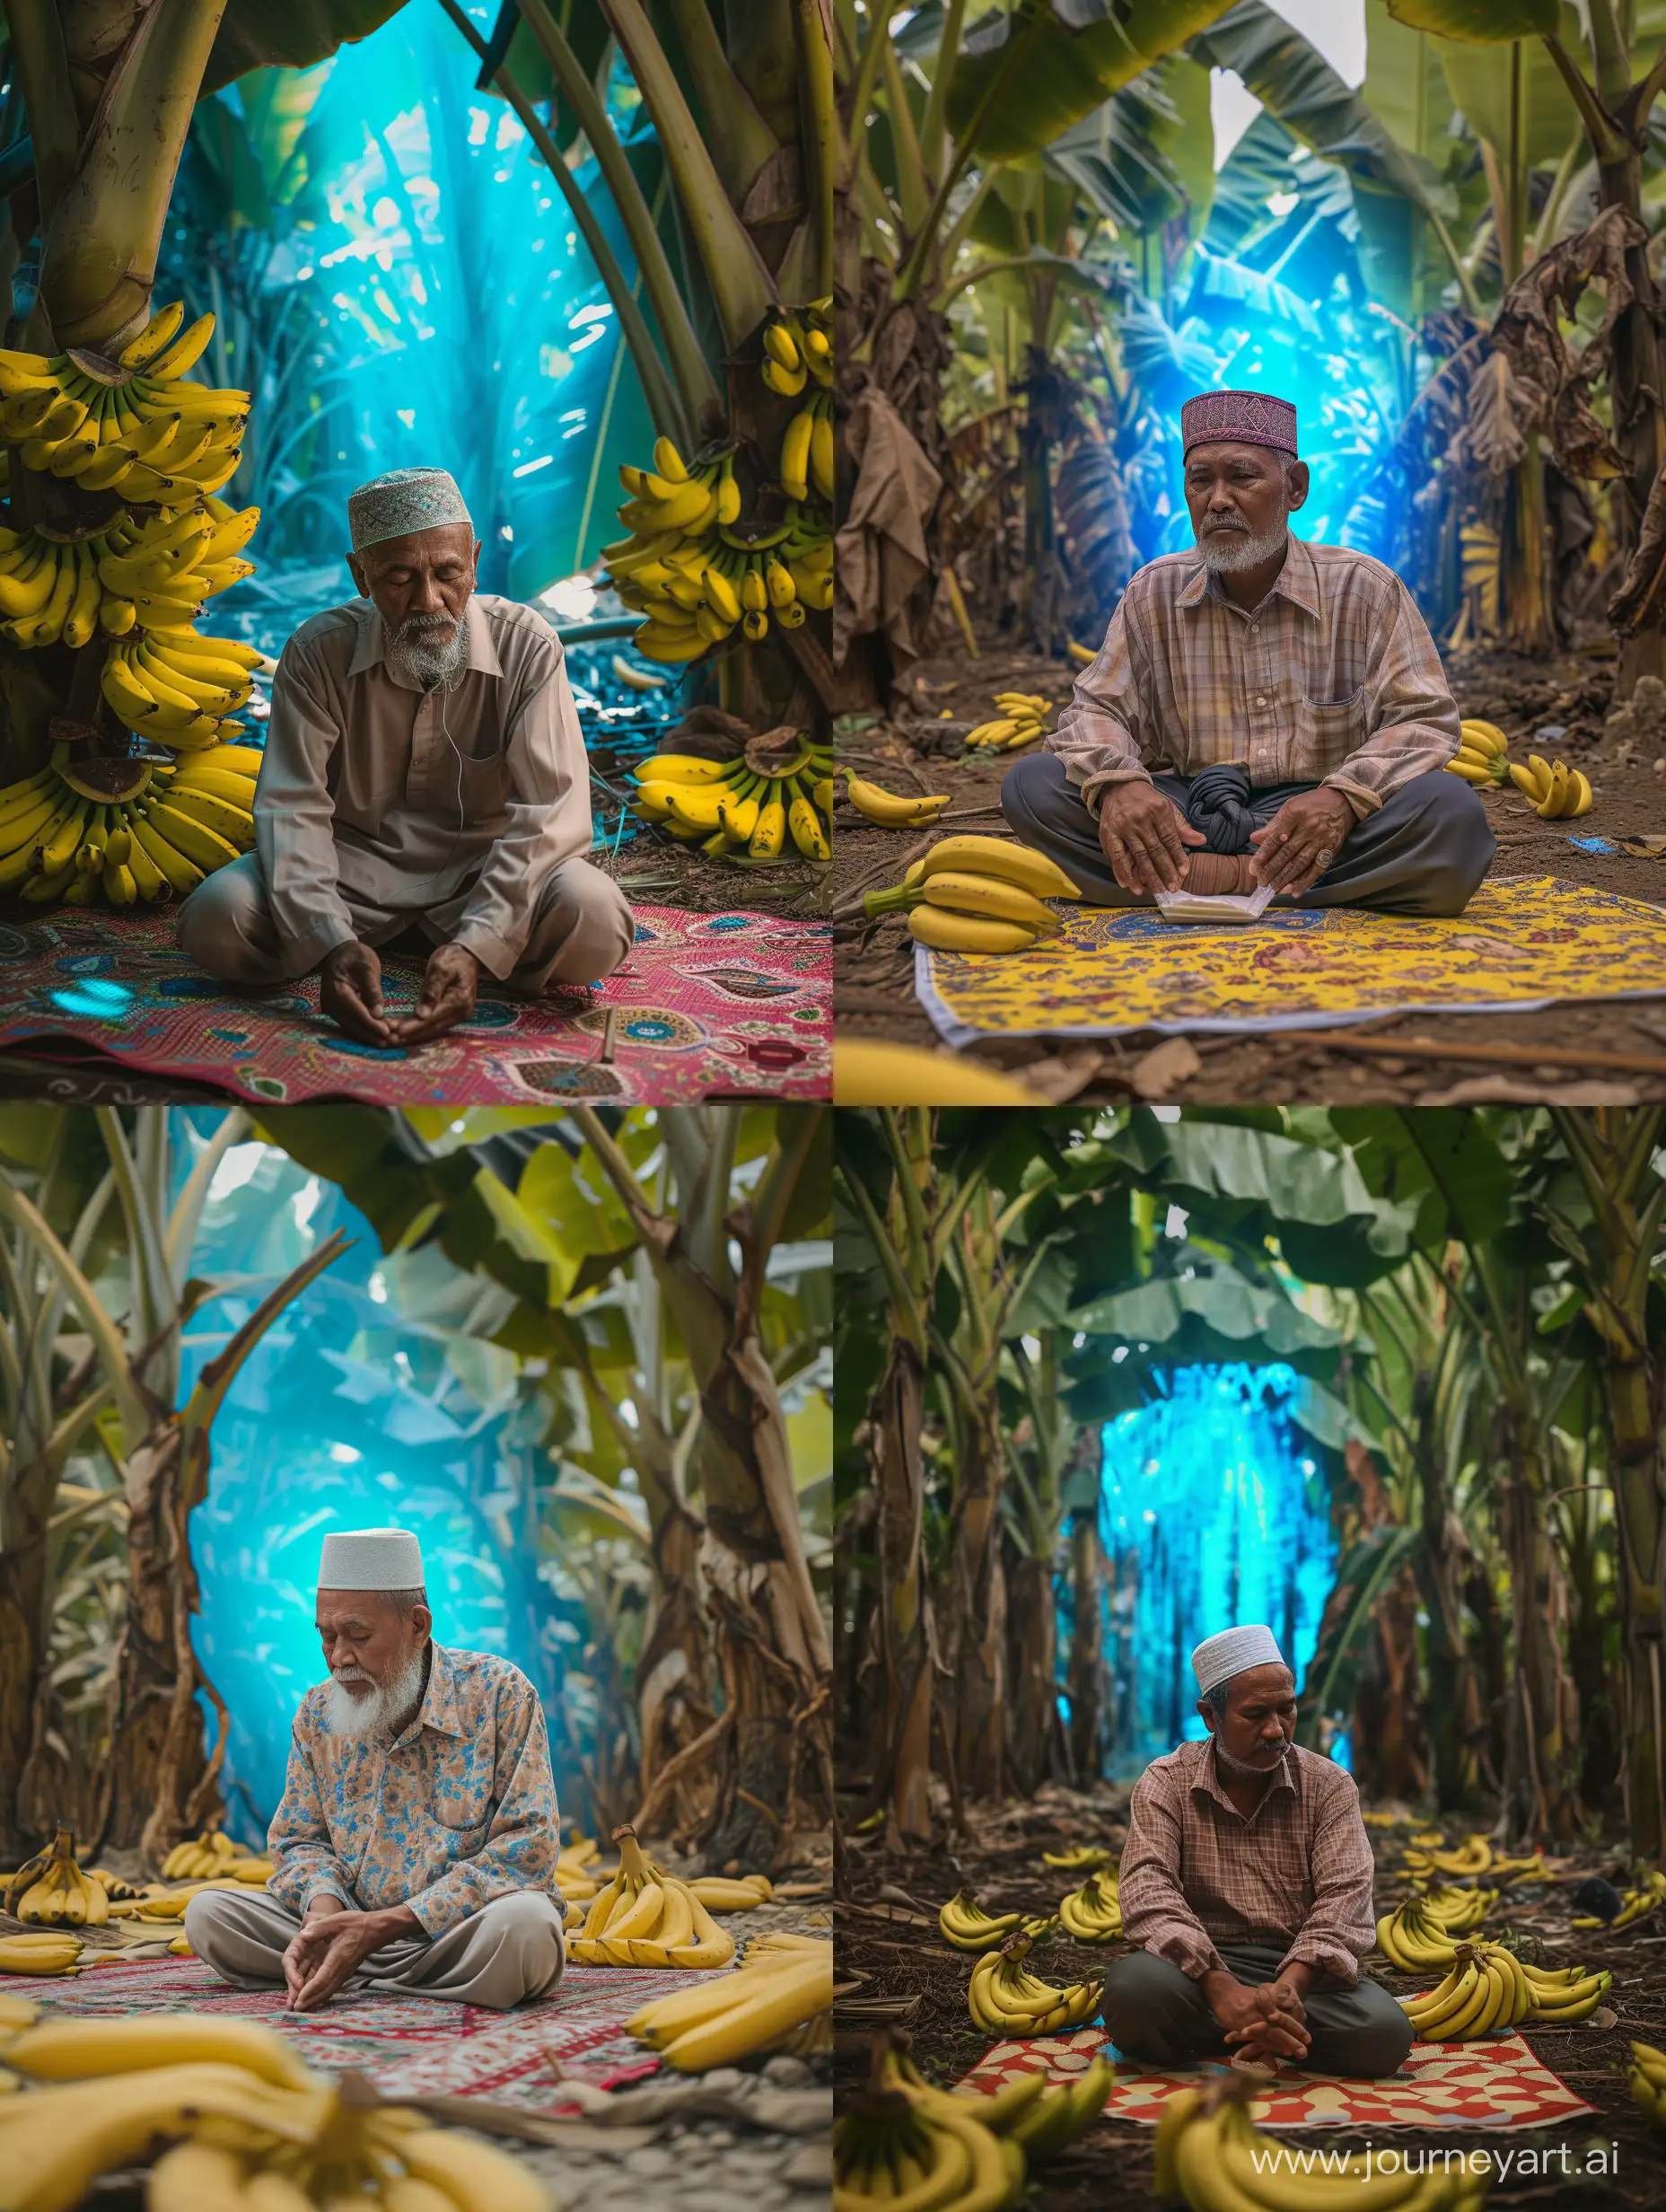 Devout-Malay-Muslim-Farmer-Prostrating-in-Banana-Plantation-with-Blue-Refraction